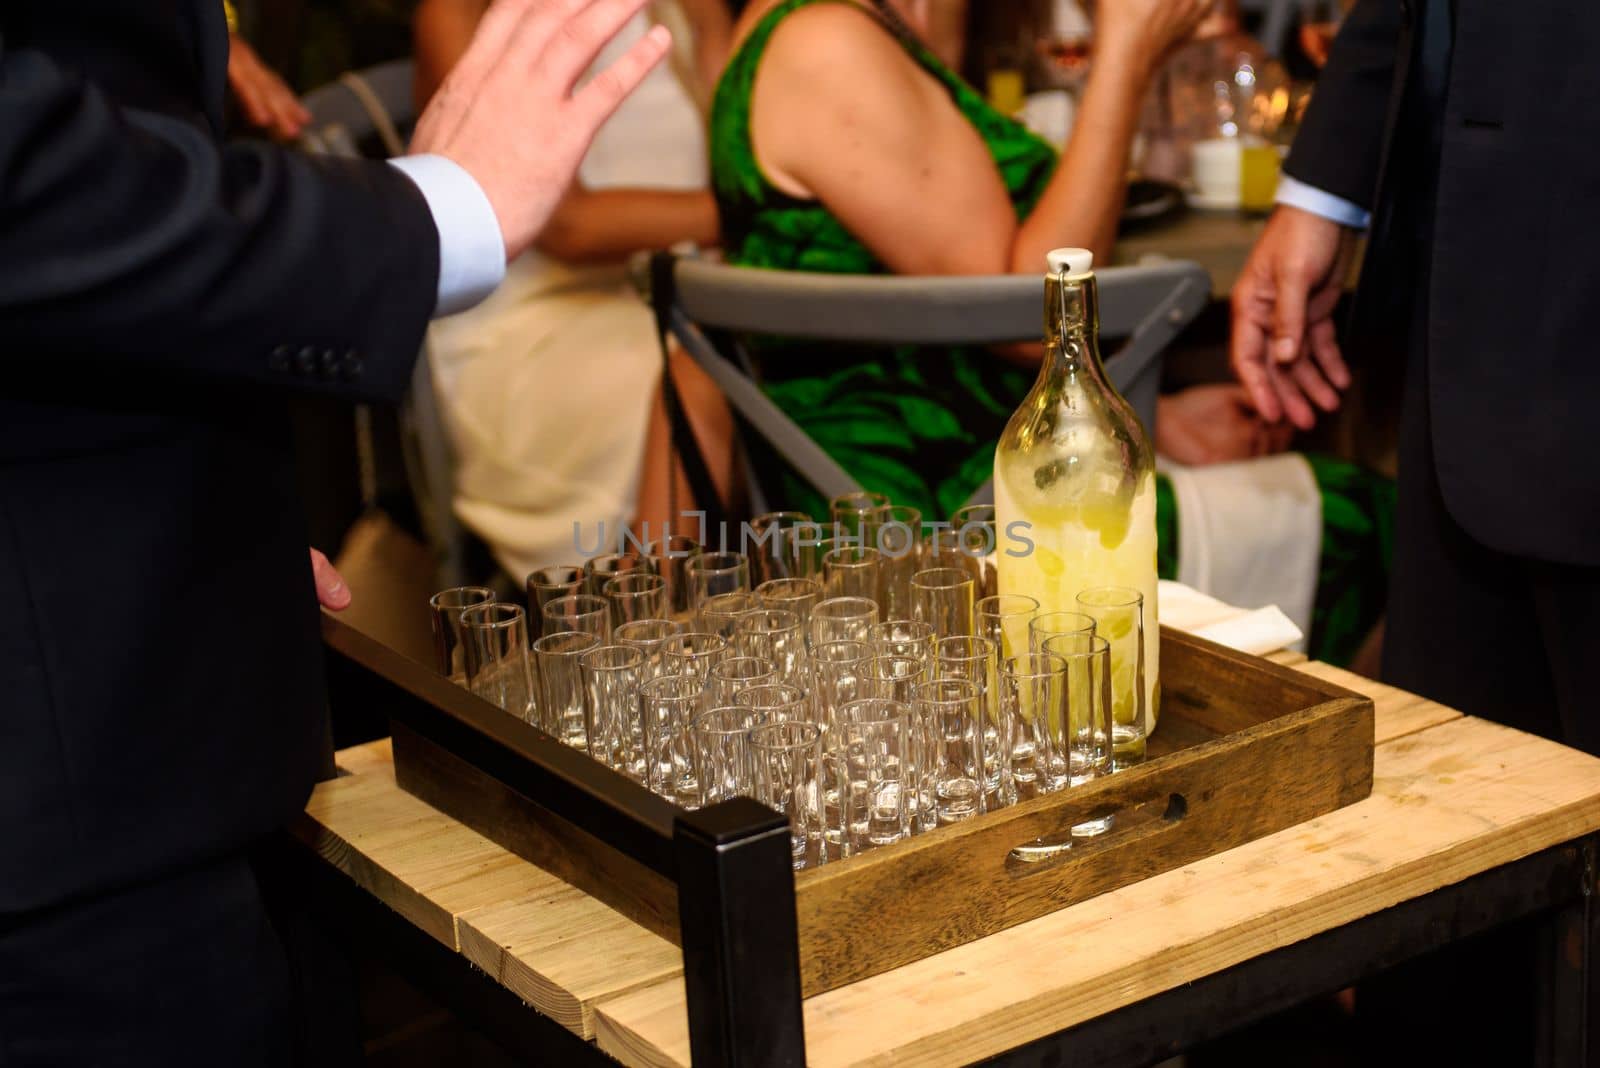 serving limoncello in glasses by Youri